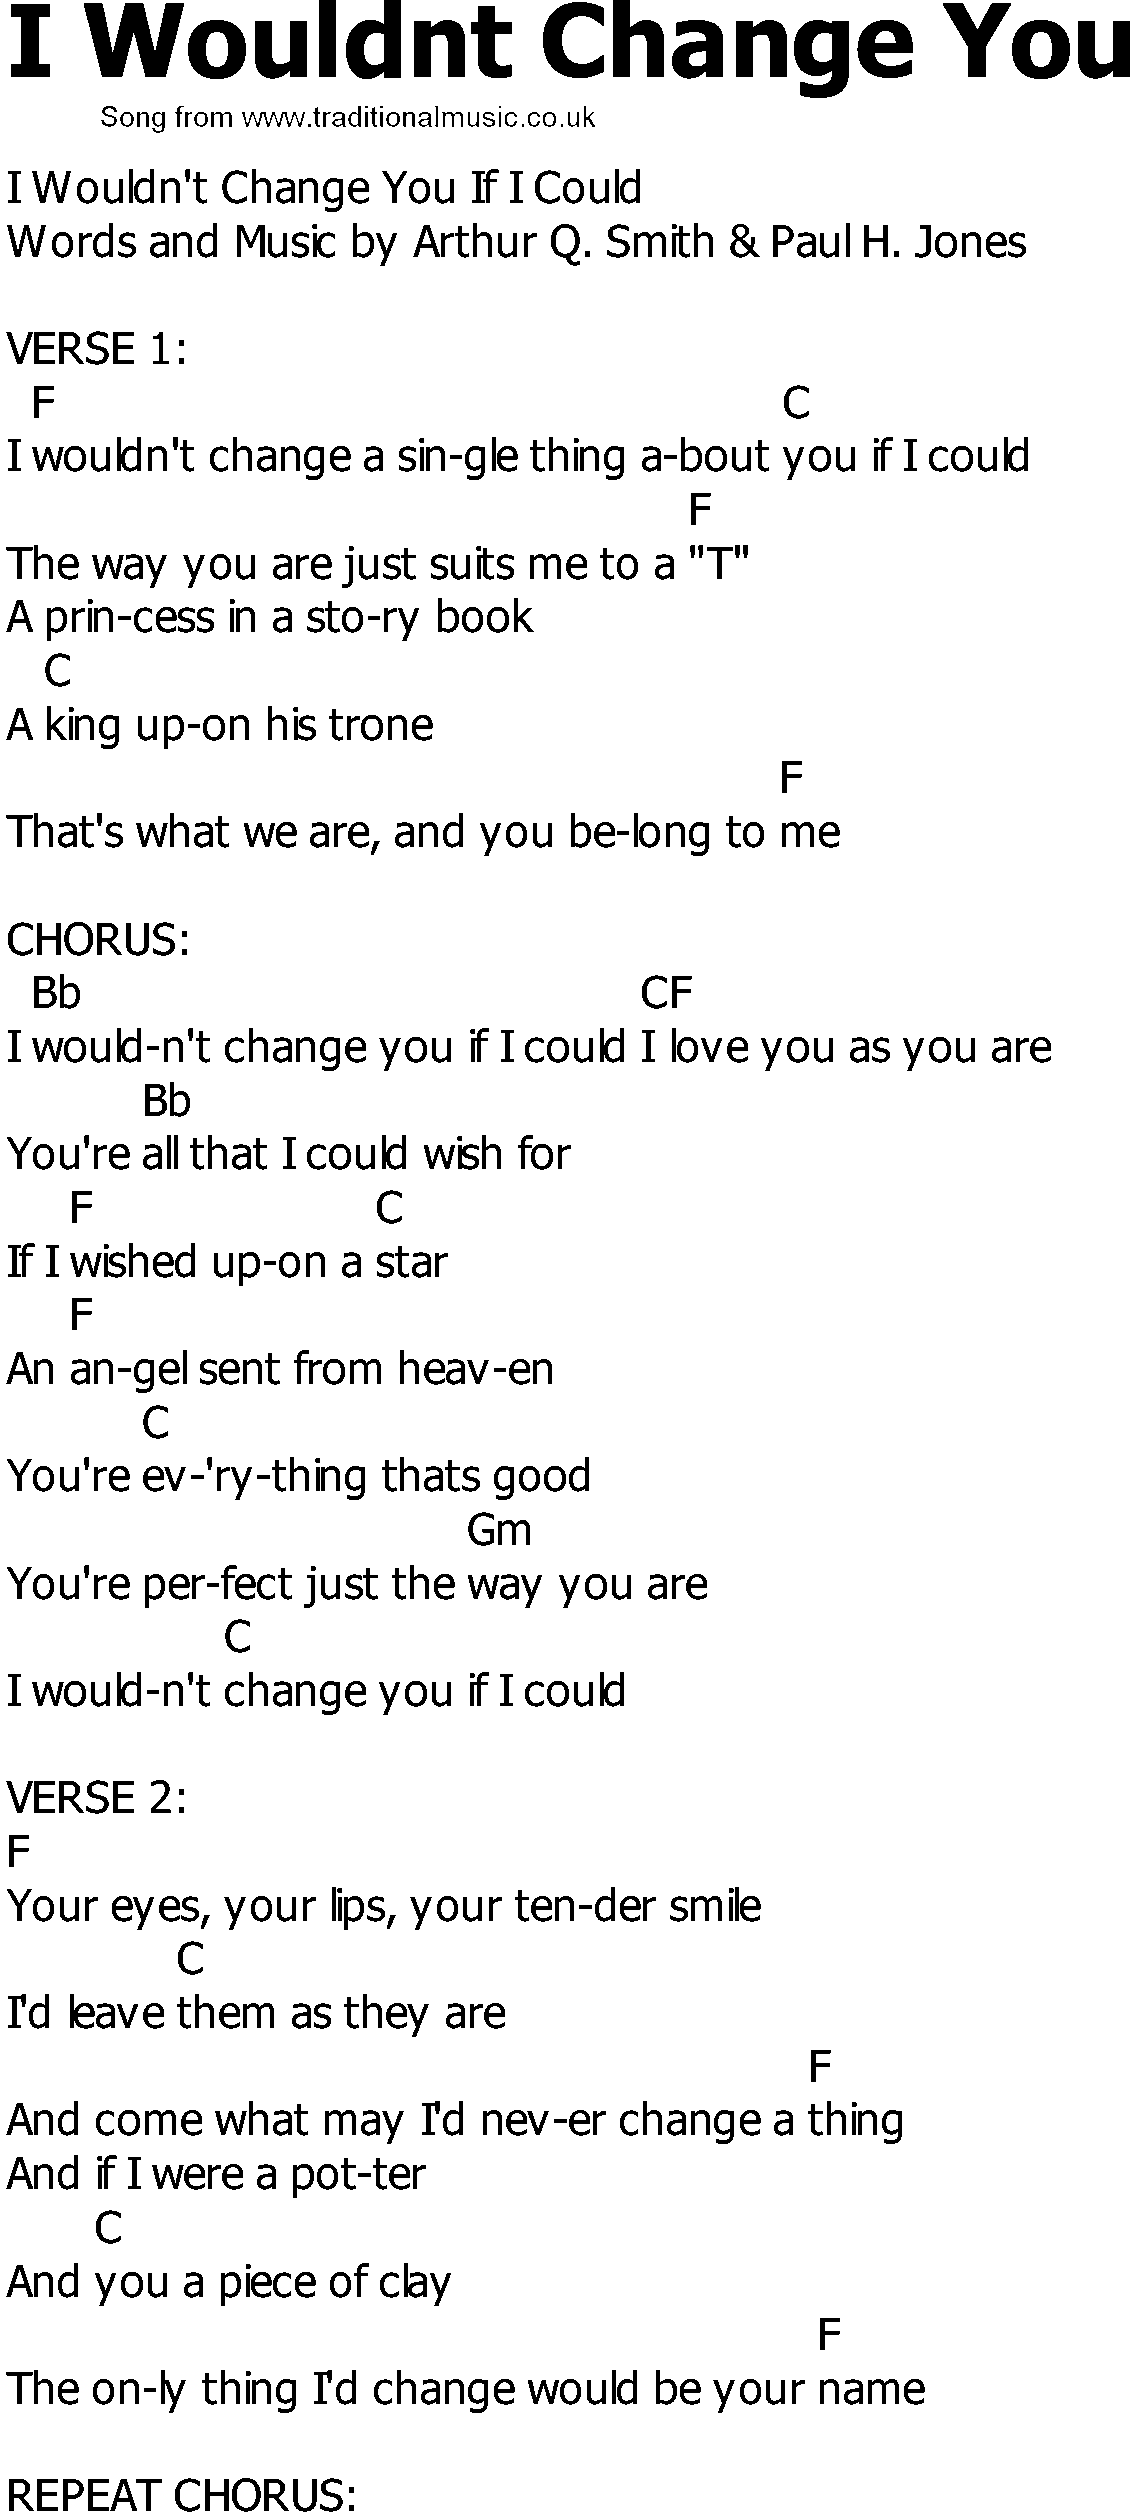 Old Country song lyrics with chords - I Wouldnt Change You